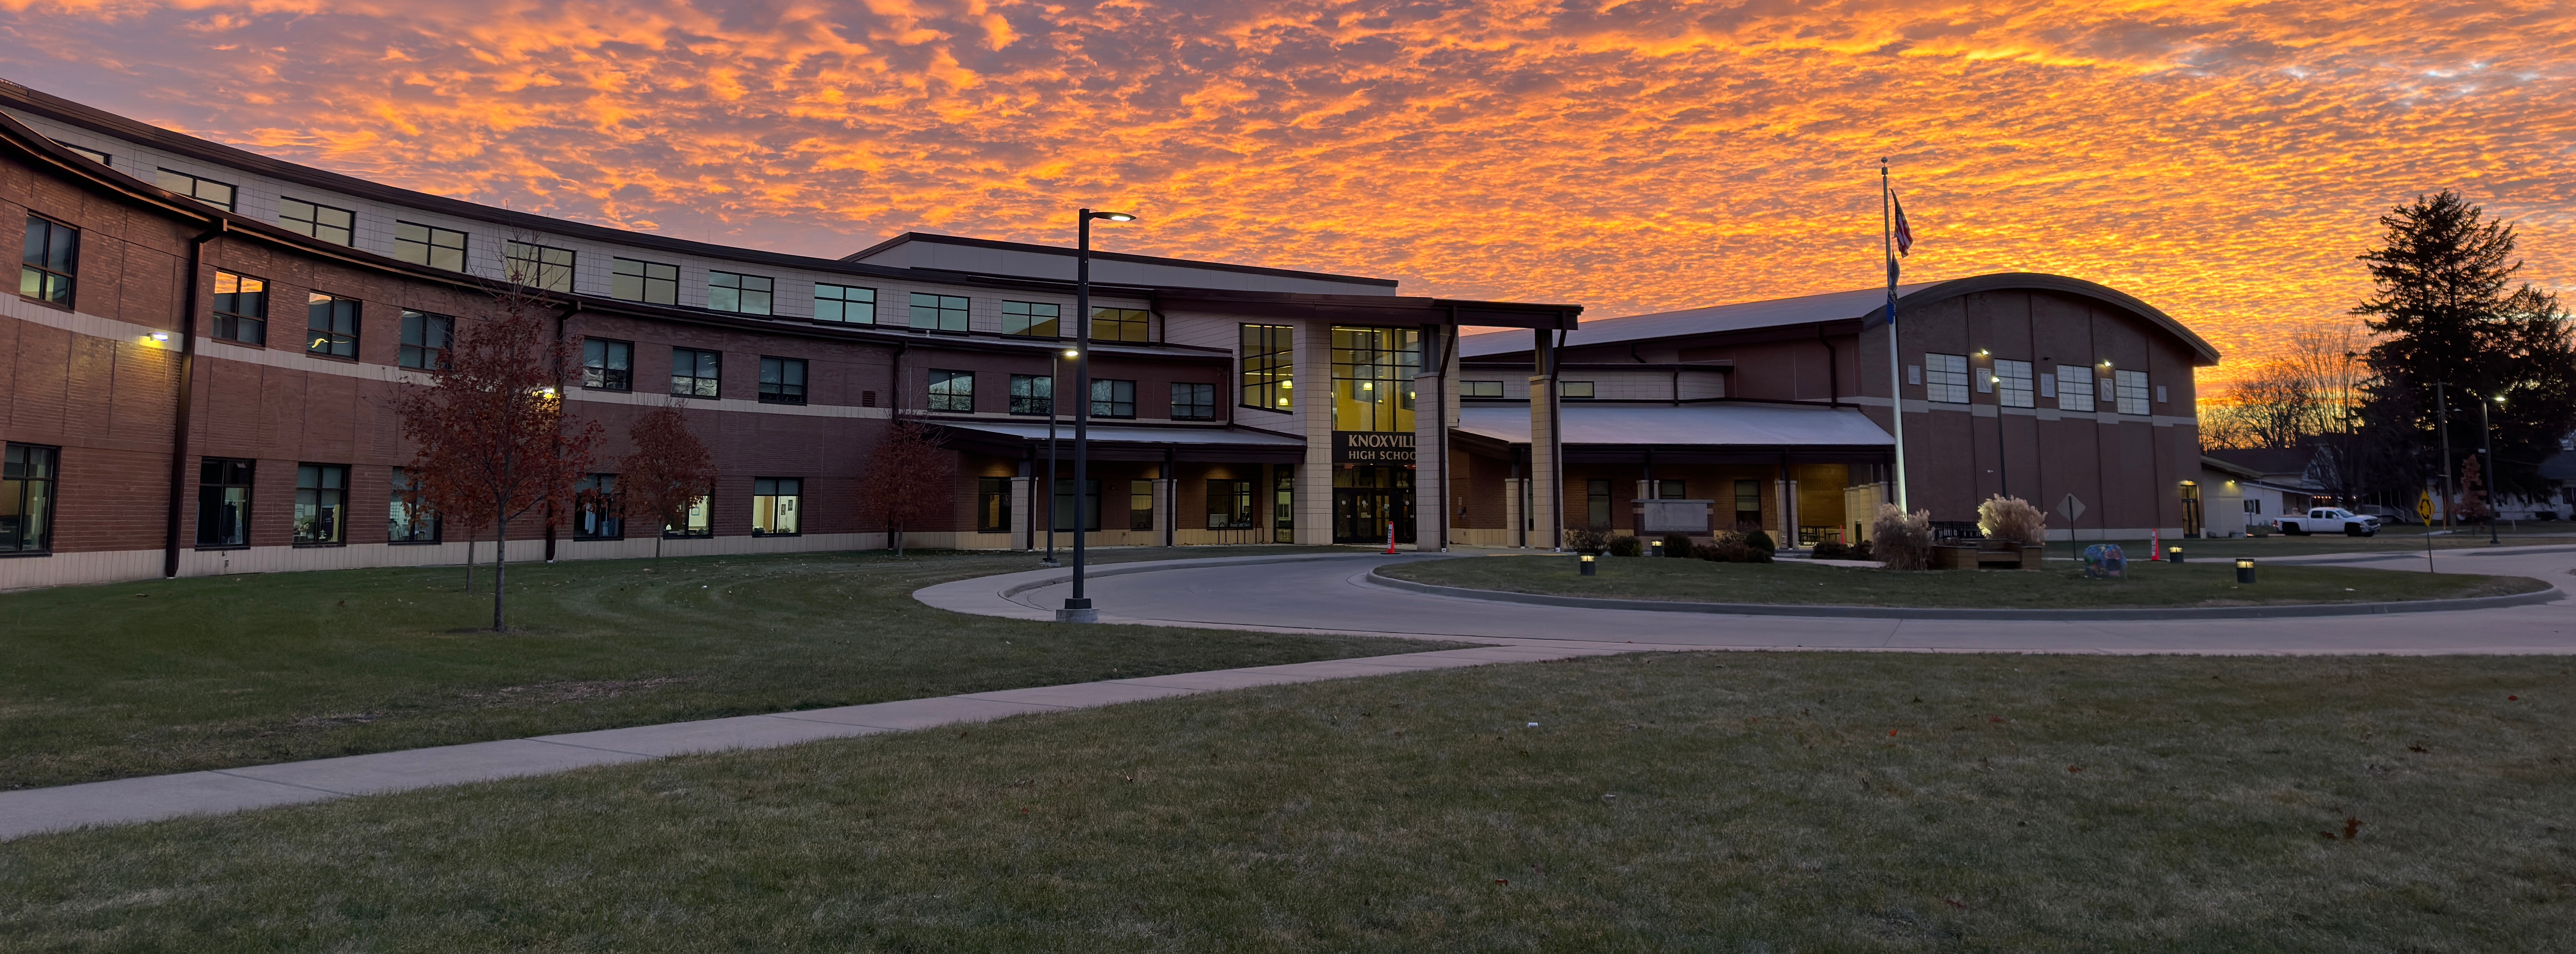 School building with sunset in background